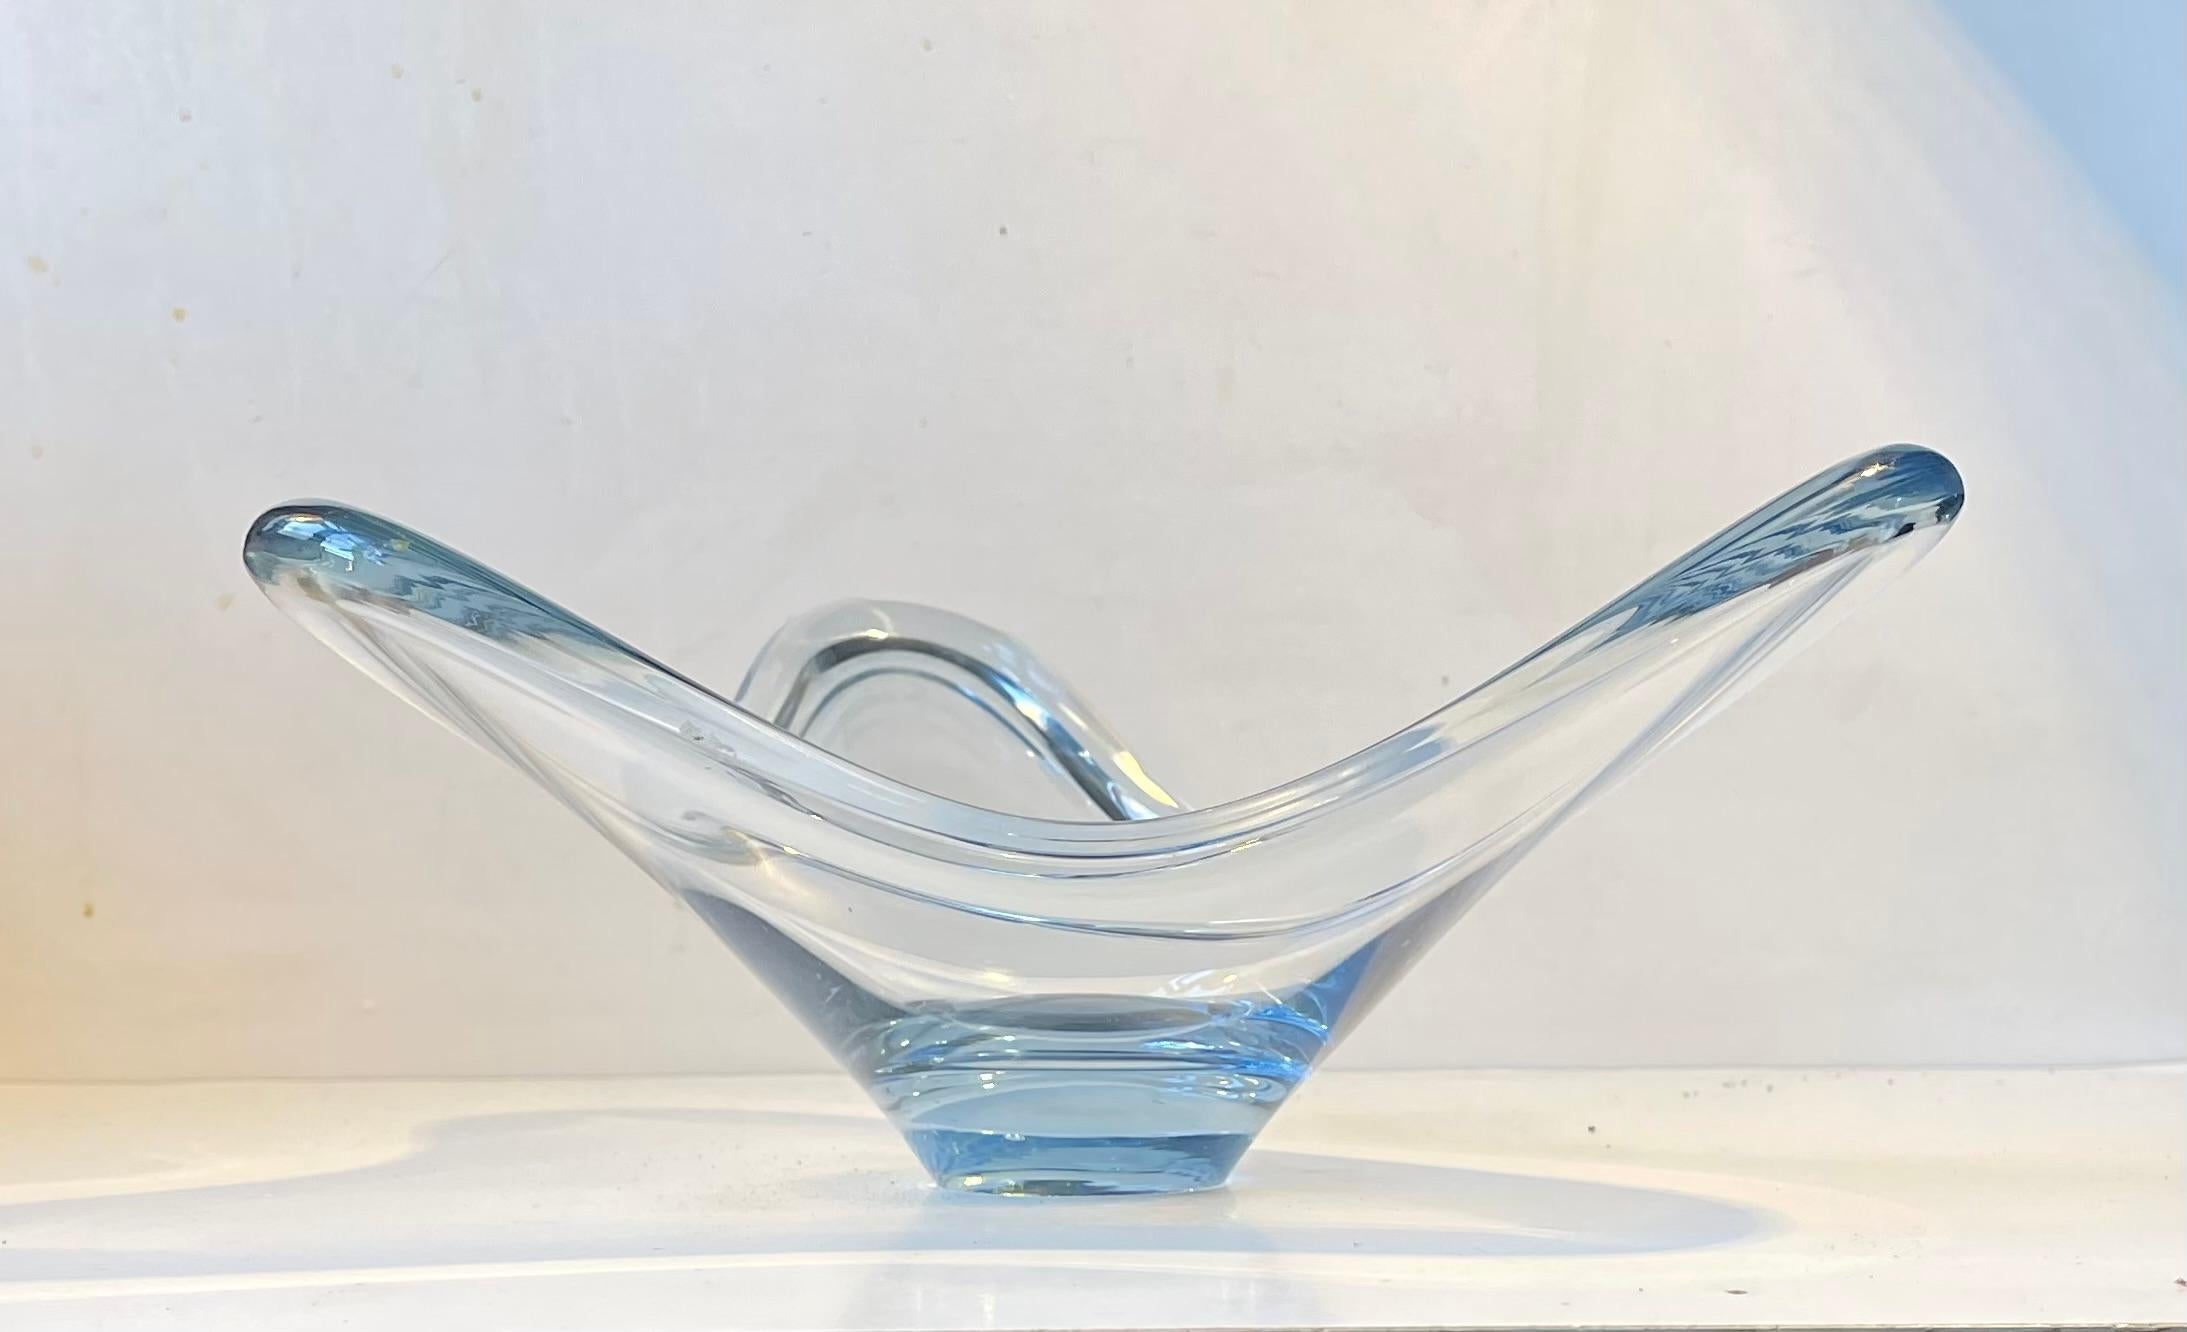 Twi-star shaped aqua blue bowl designed by Per Lütken in 1964. Manufactured at Holmegaard in Denmark during the mid-late 1960s. It is called Aqua or Fionia and it is signed PLS by the designer to its base. Measurements: H: 15.5 cm, W/D: 29/30 cm.